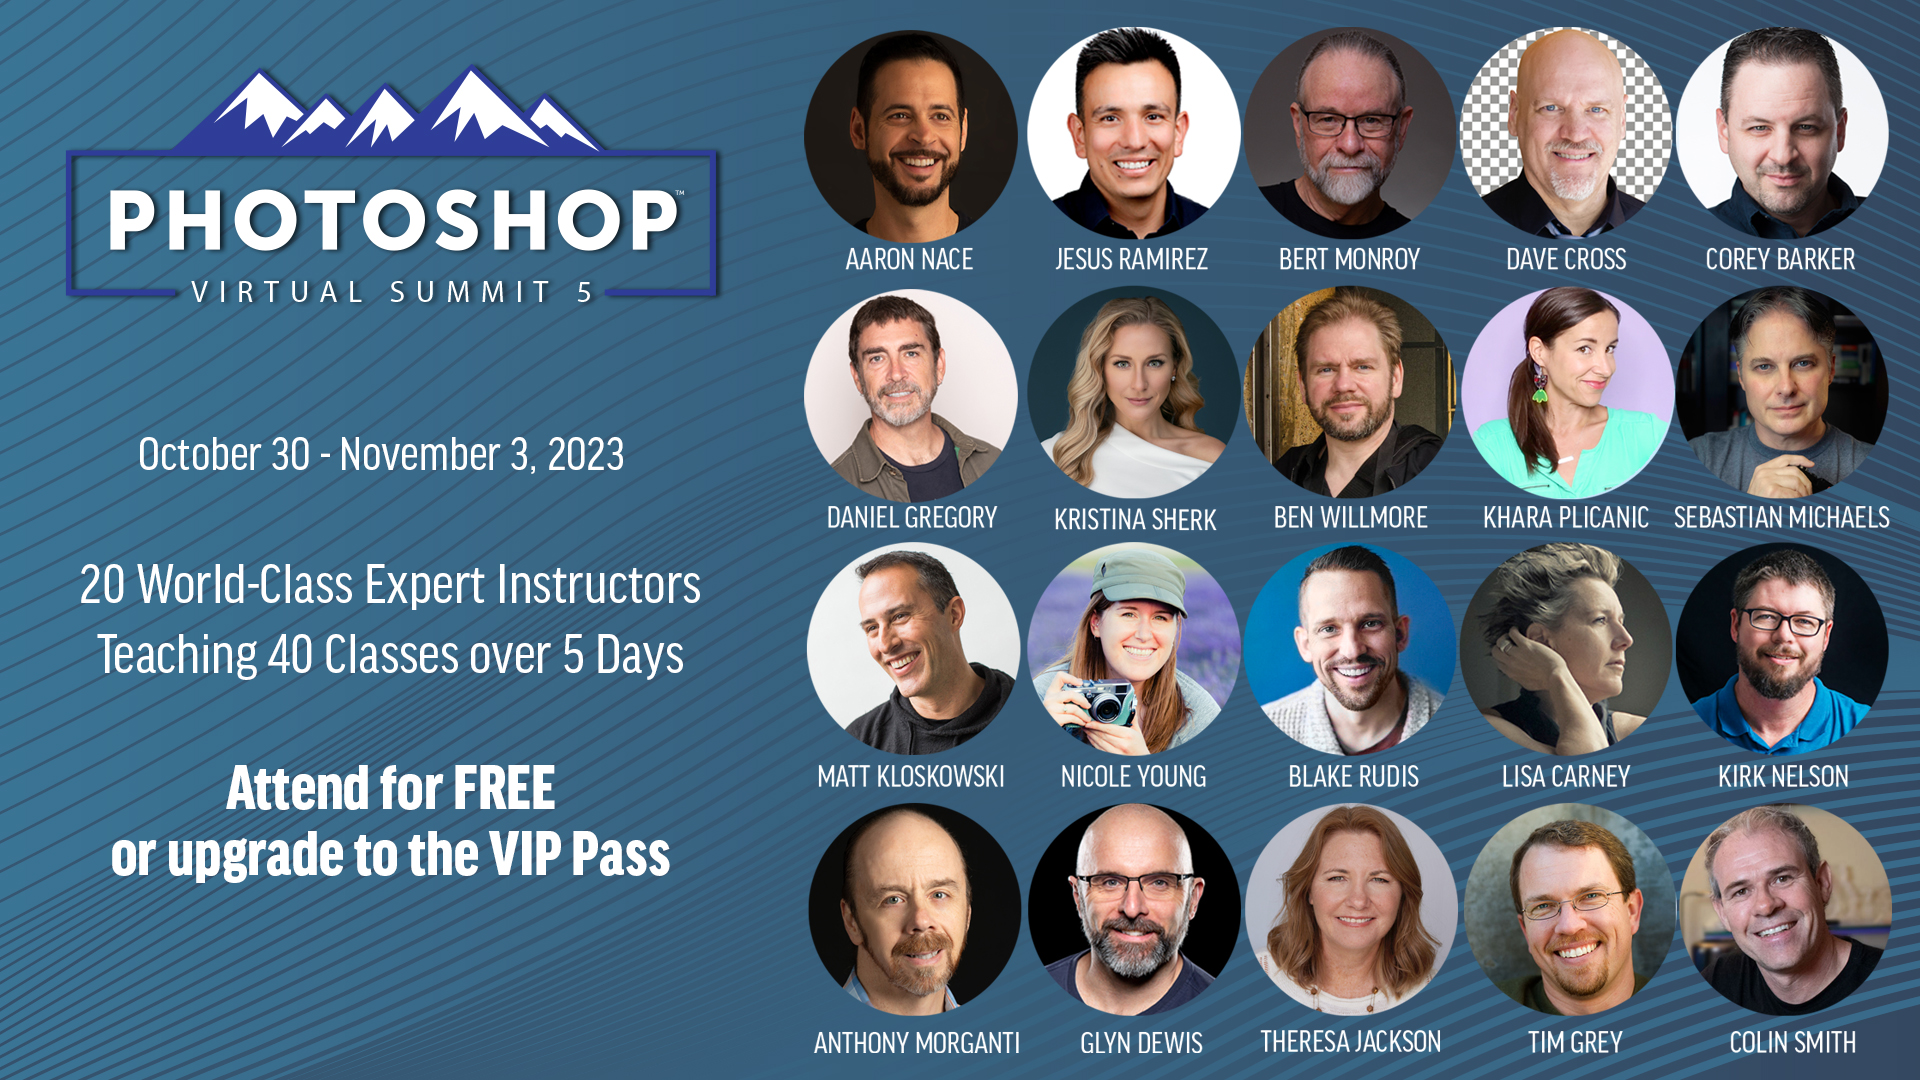 Photoshop Virtual summit banner with blue background and headshots of twenty four speakers.